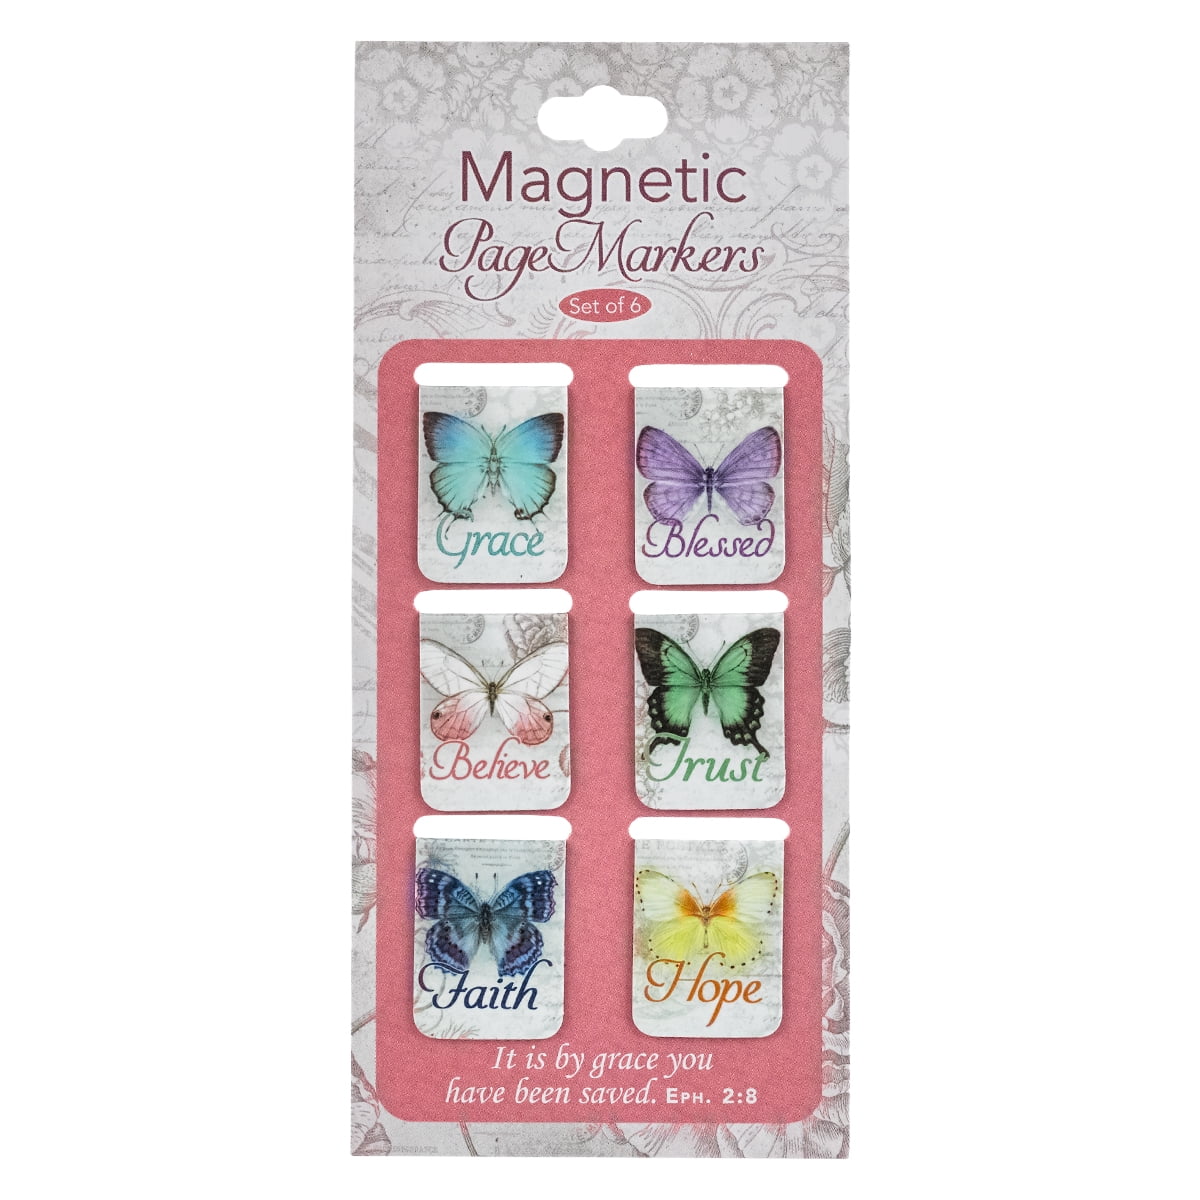 369801 Bookmark-pagemarker-magnetic-butterfly Blessings-small-set Of 6